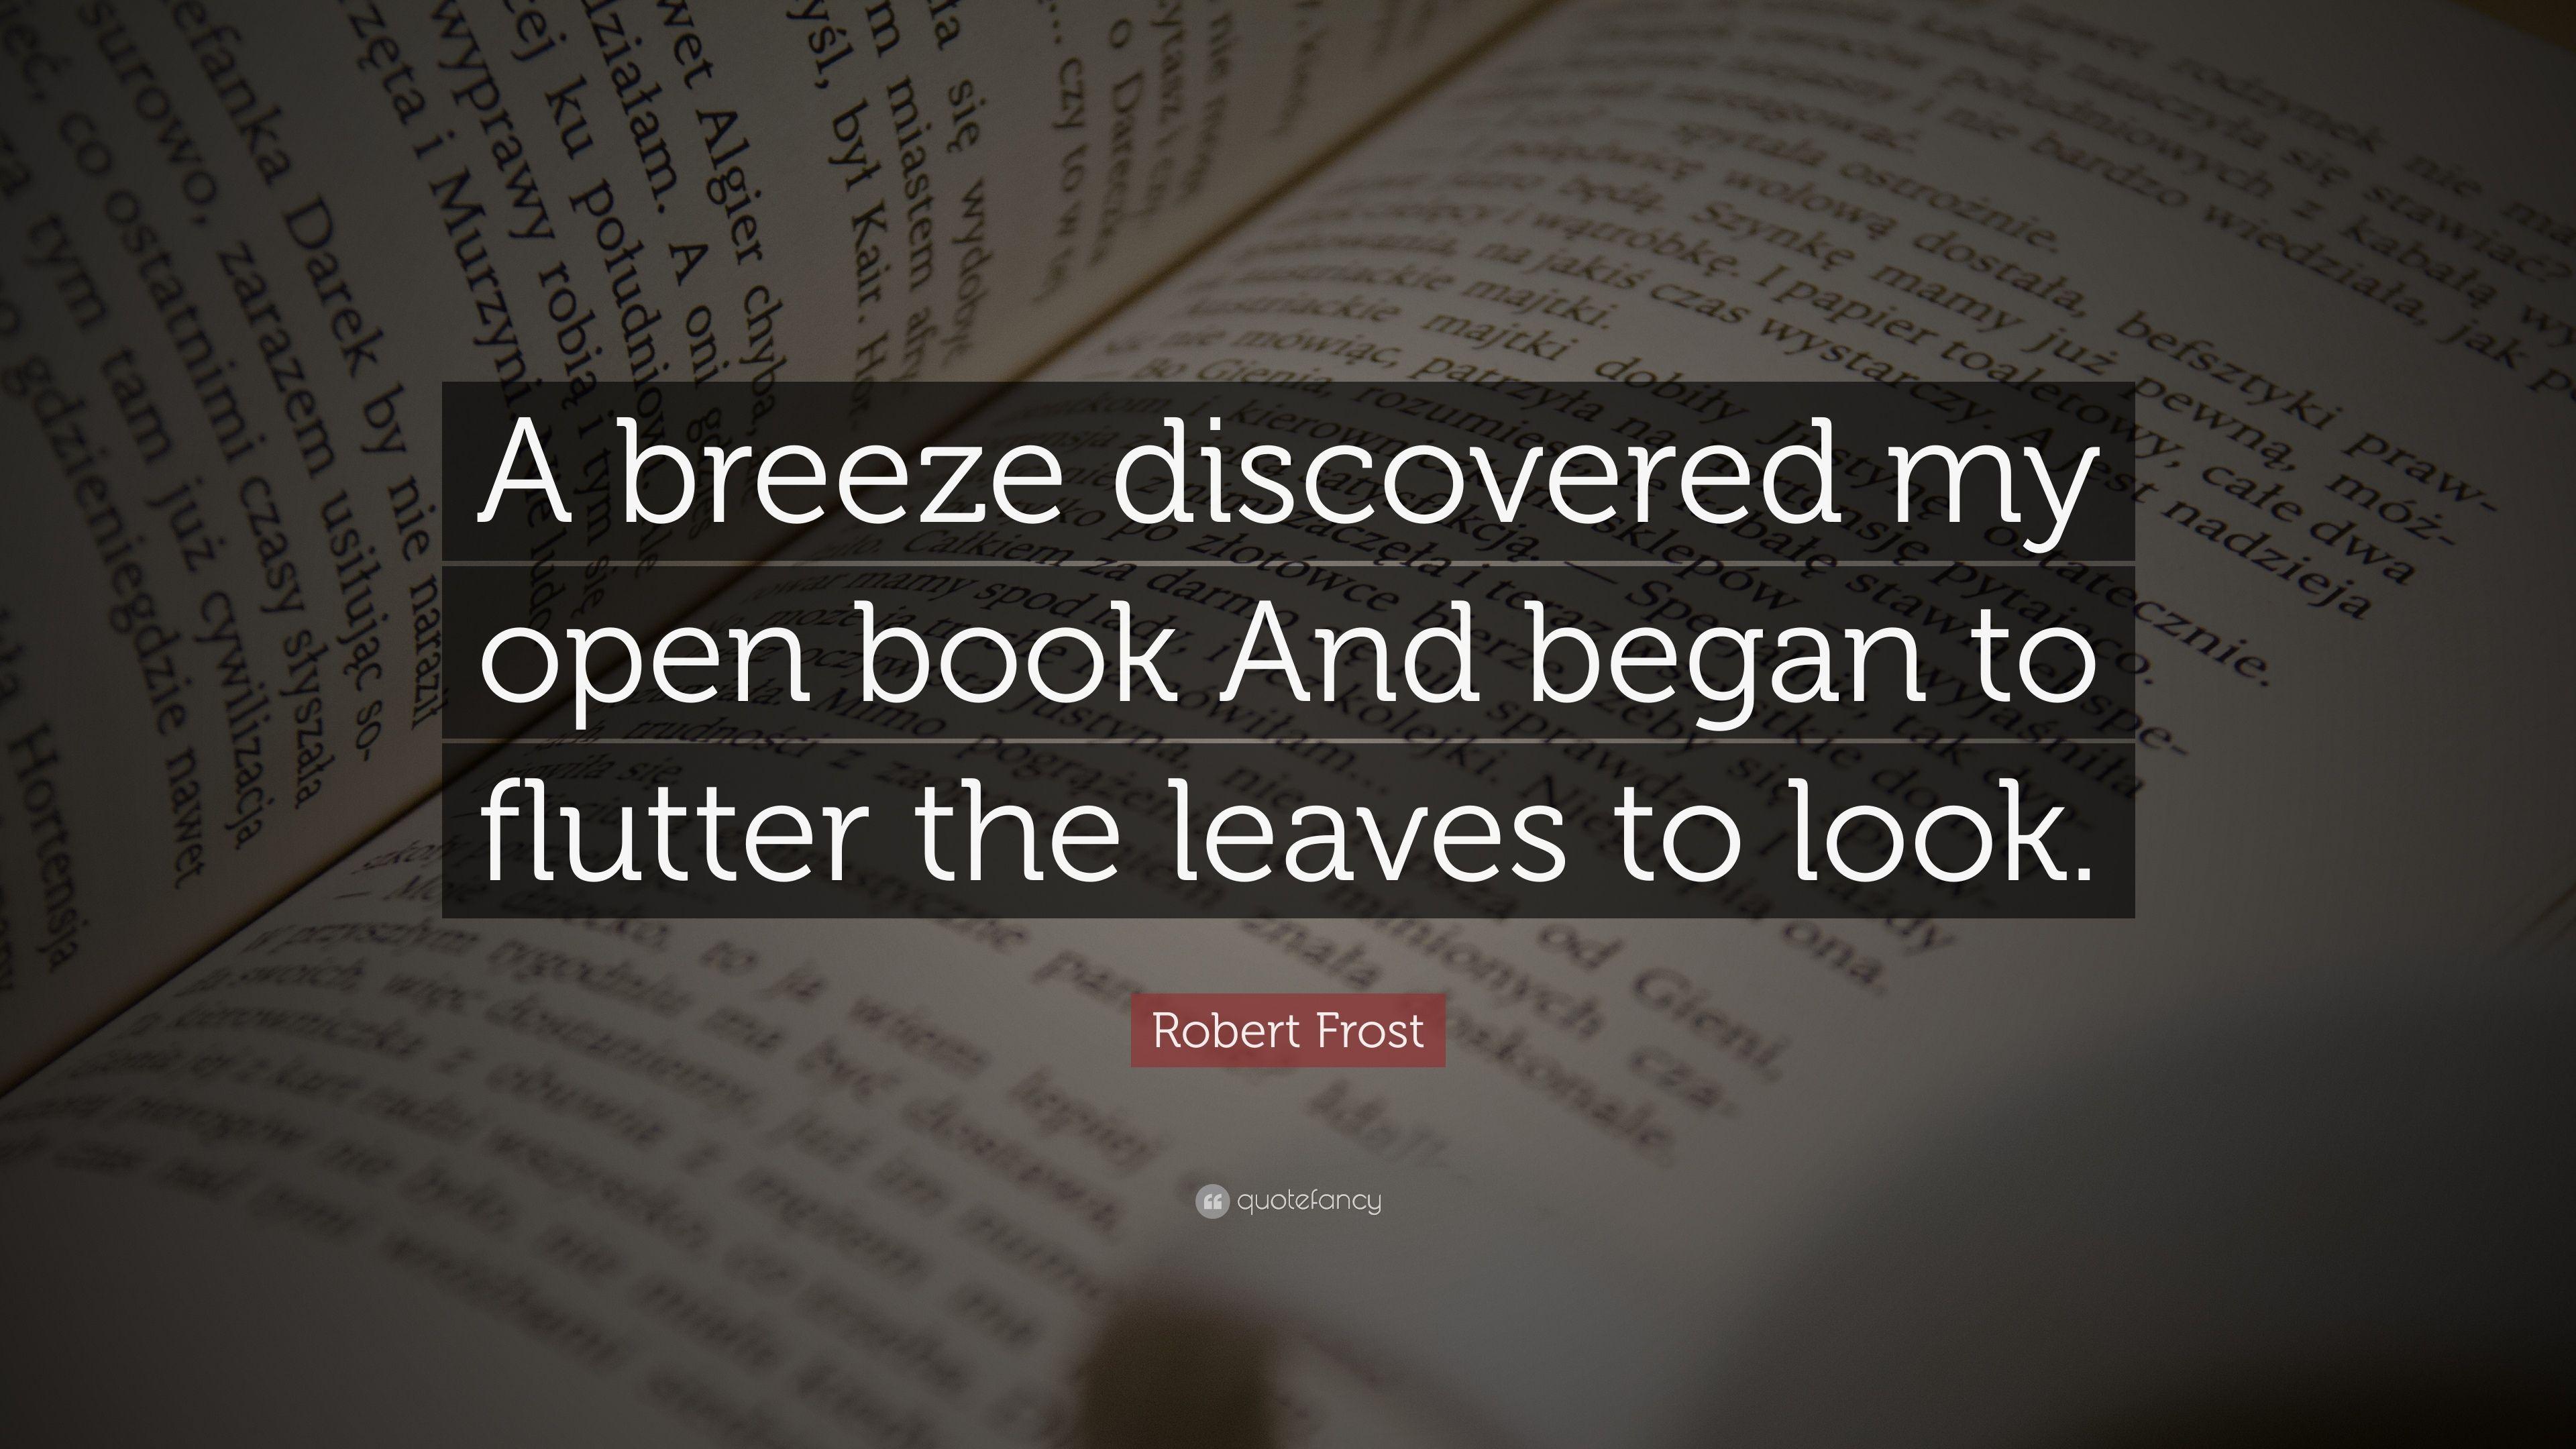 Robert Frost Quote: “A breeze discovered my open book And began to